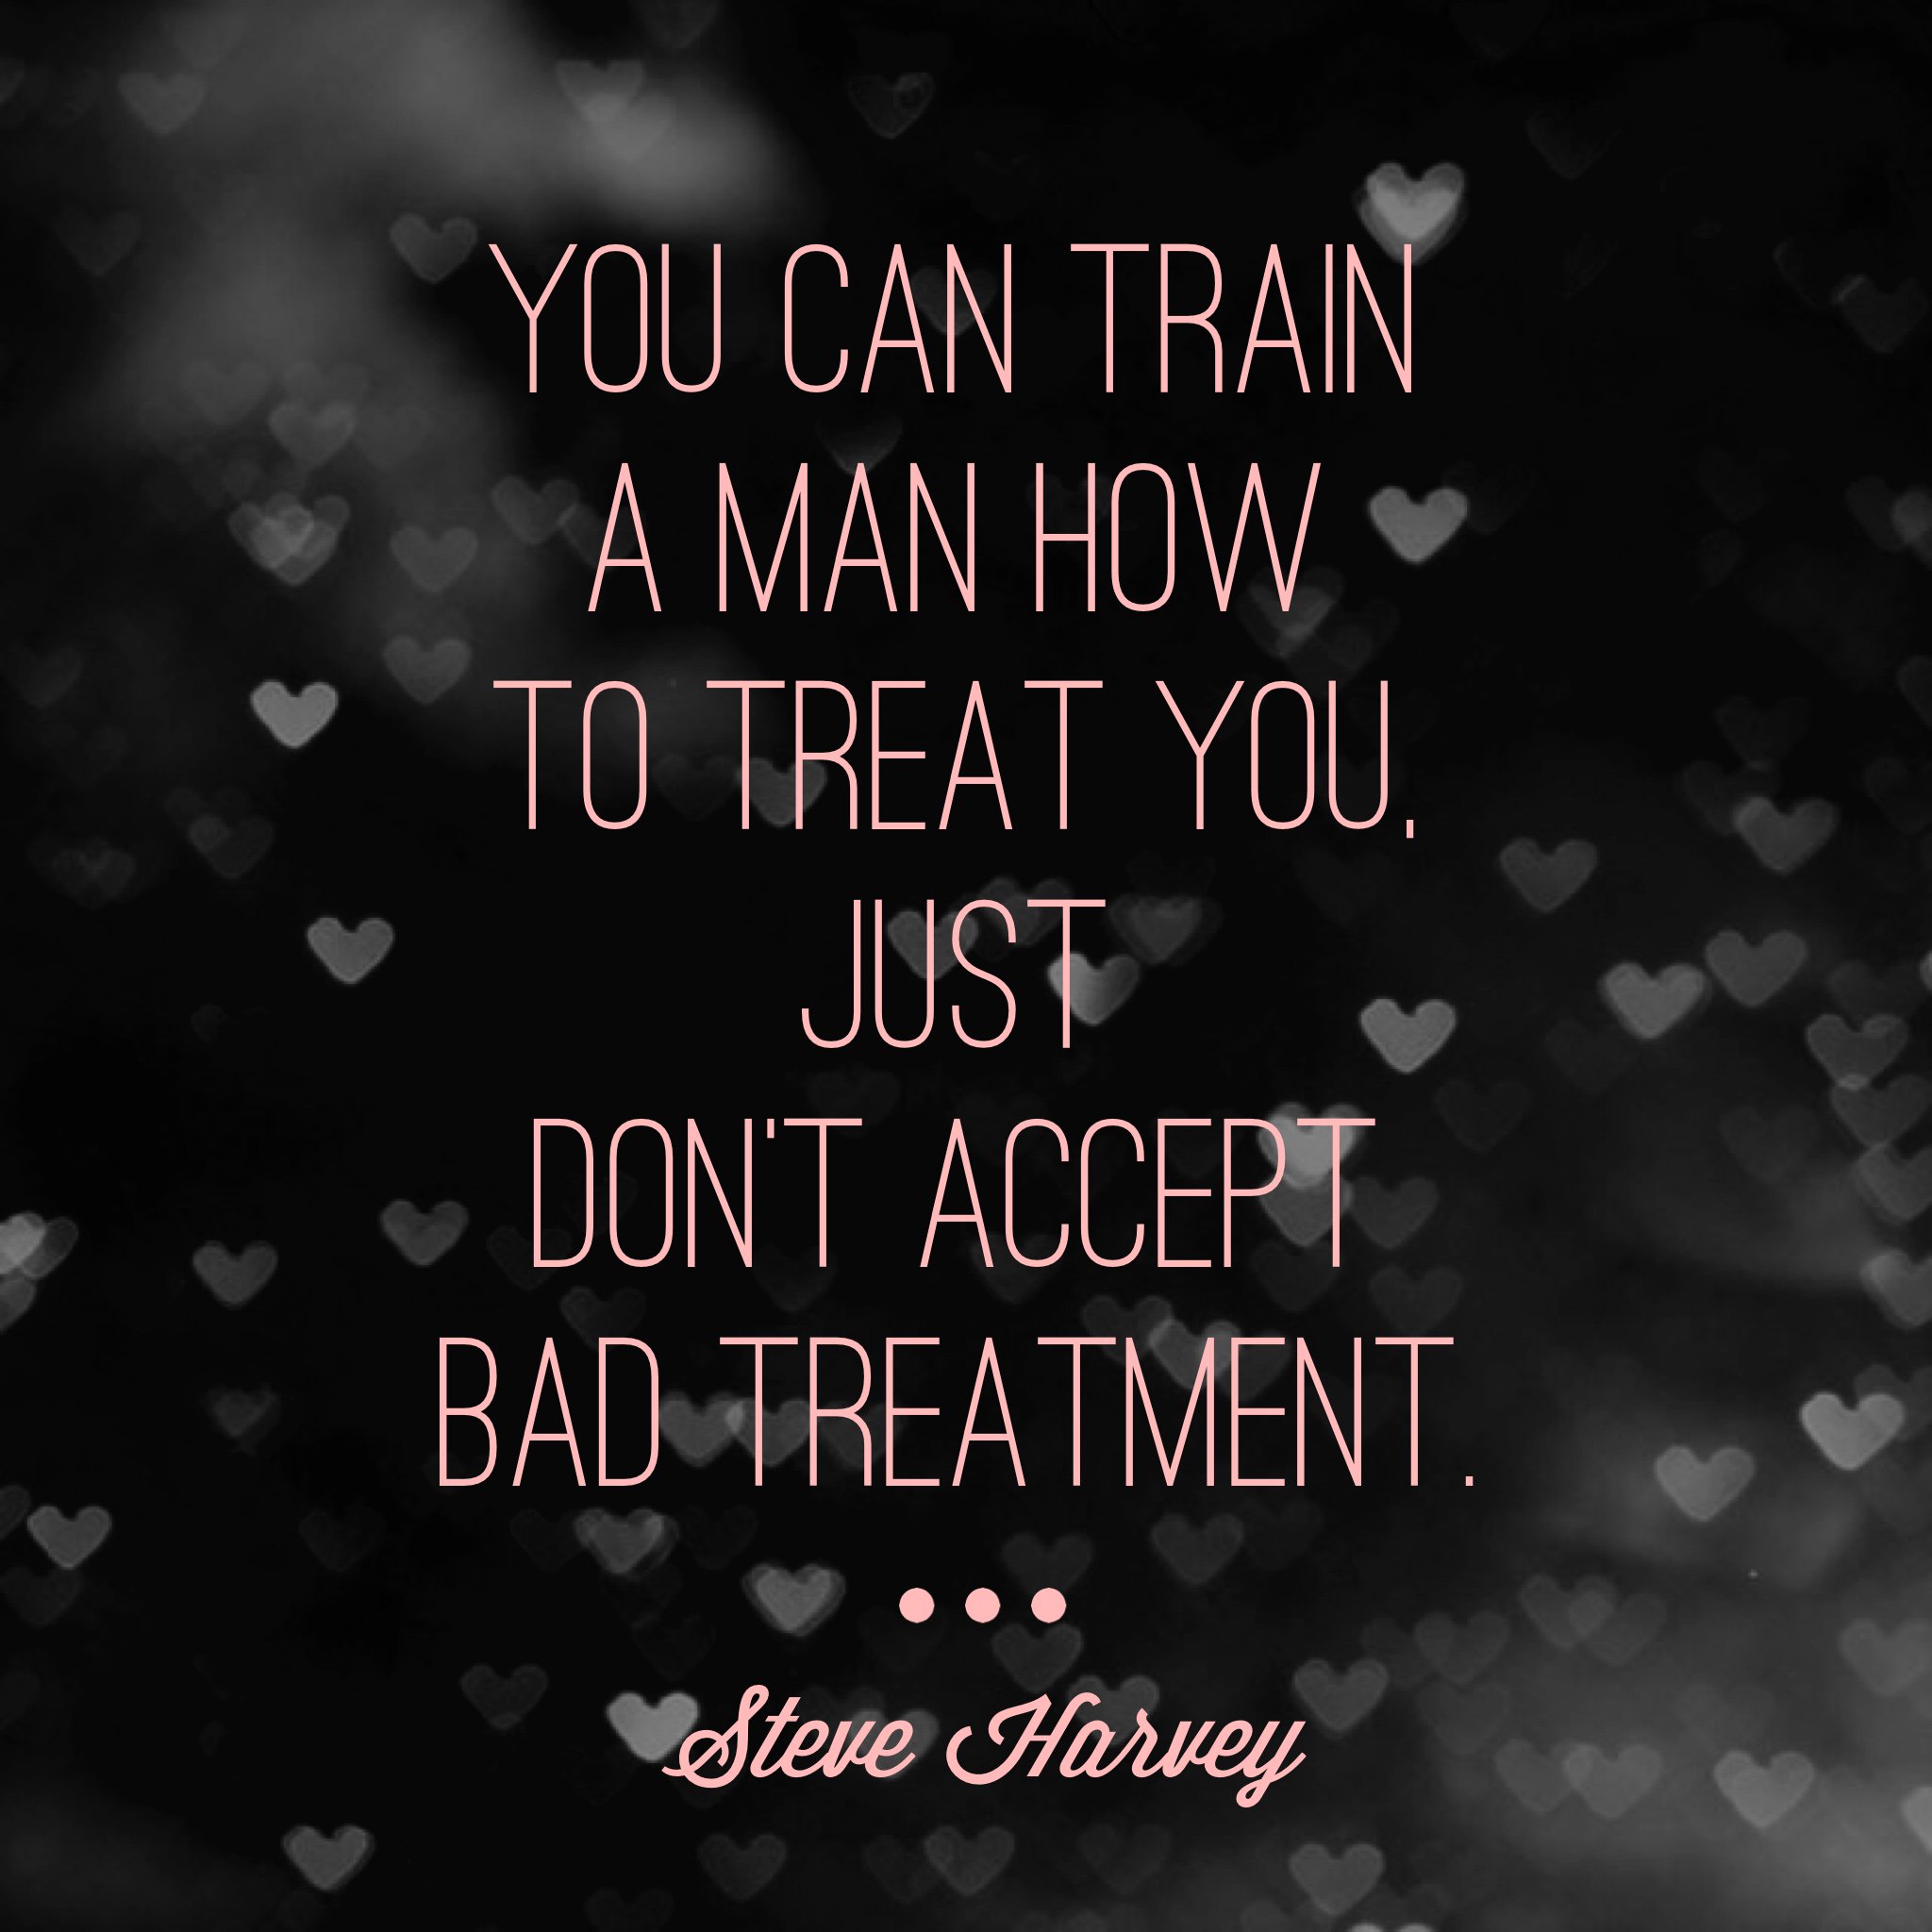 42. You can train a man how to treat you, just don't accept bad treatm...